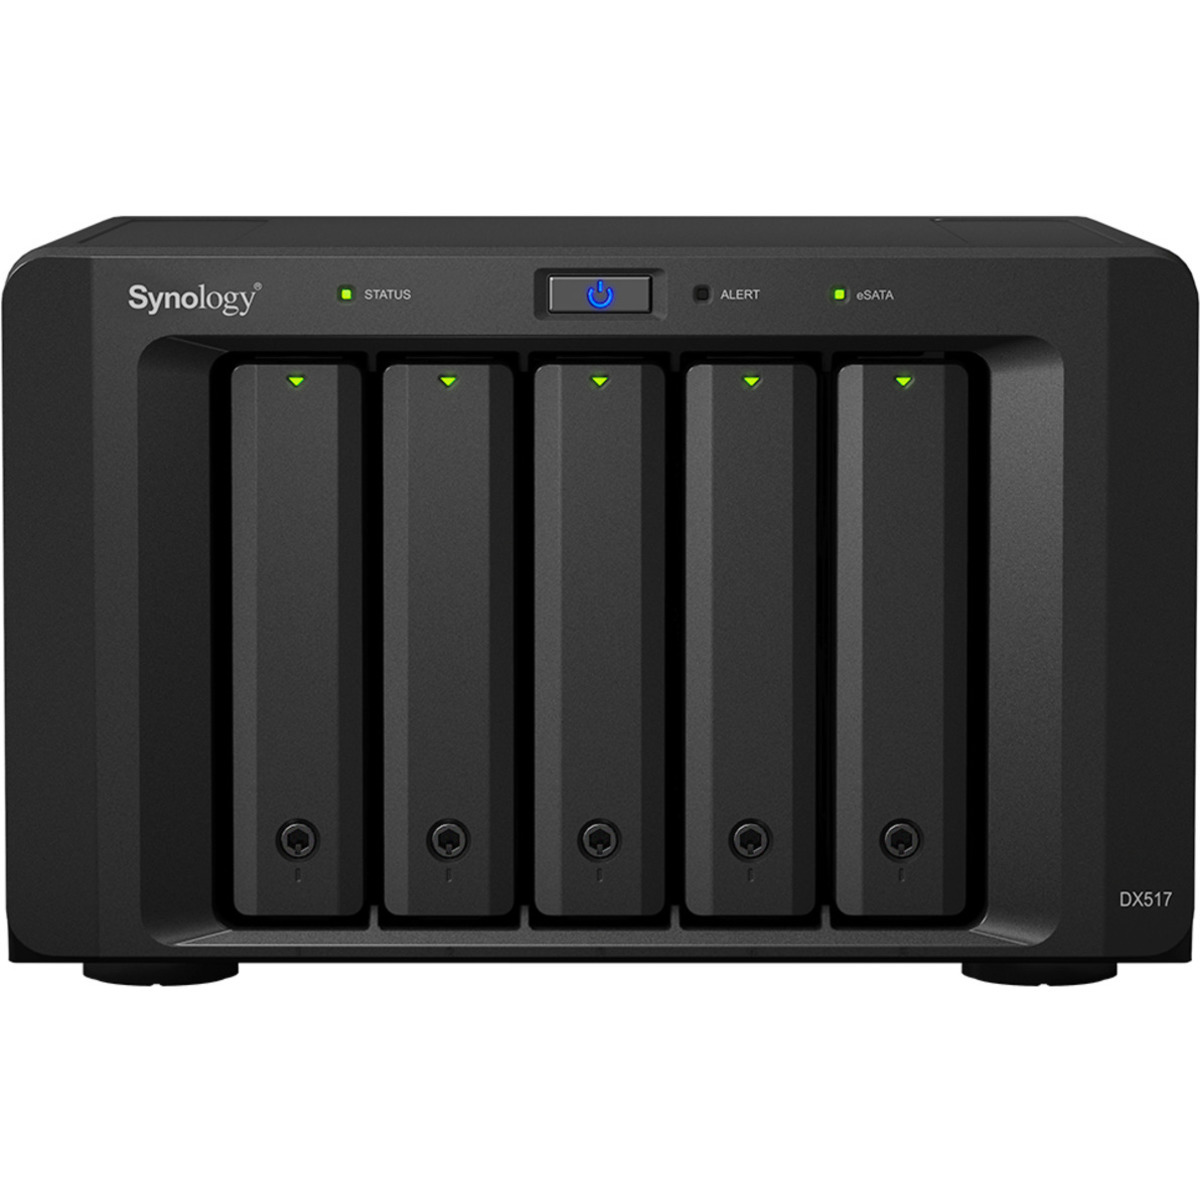 buy $1379 Synology DX517 30tb Desktop Expansion Enclosure 5x6000gb Western Digital Blue WD60EZAZ 3.5 5400rpm SATA 6Gb/s HDD CONSUMER Class Drives Installed - Burn-In Tested - nas headquarters buy network attached storage server device das new raid-5 free shipping usa christmas new year holiday sale DX517